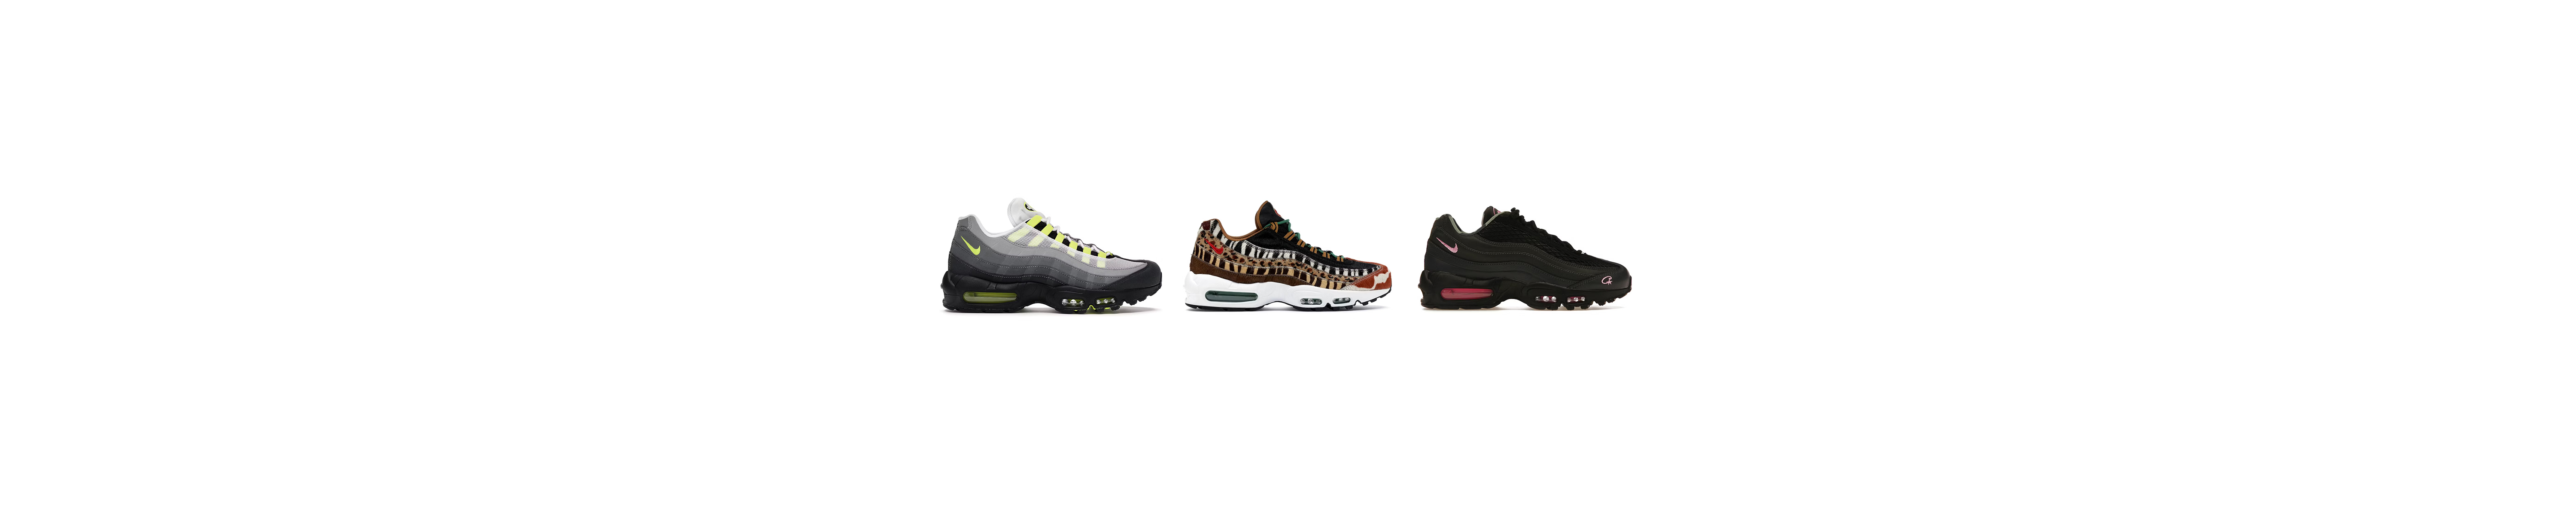 The Best Nike Air Max 95s of All Time